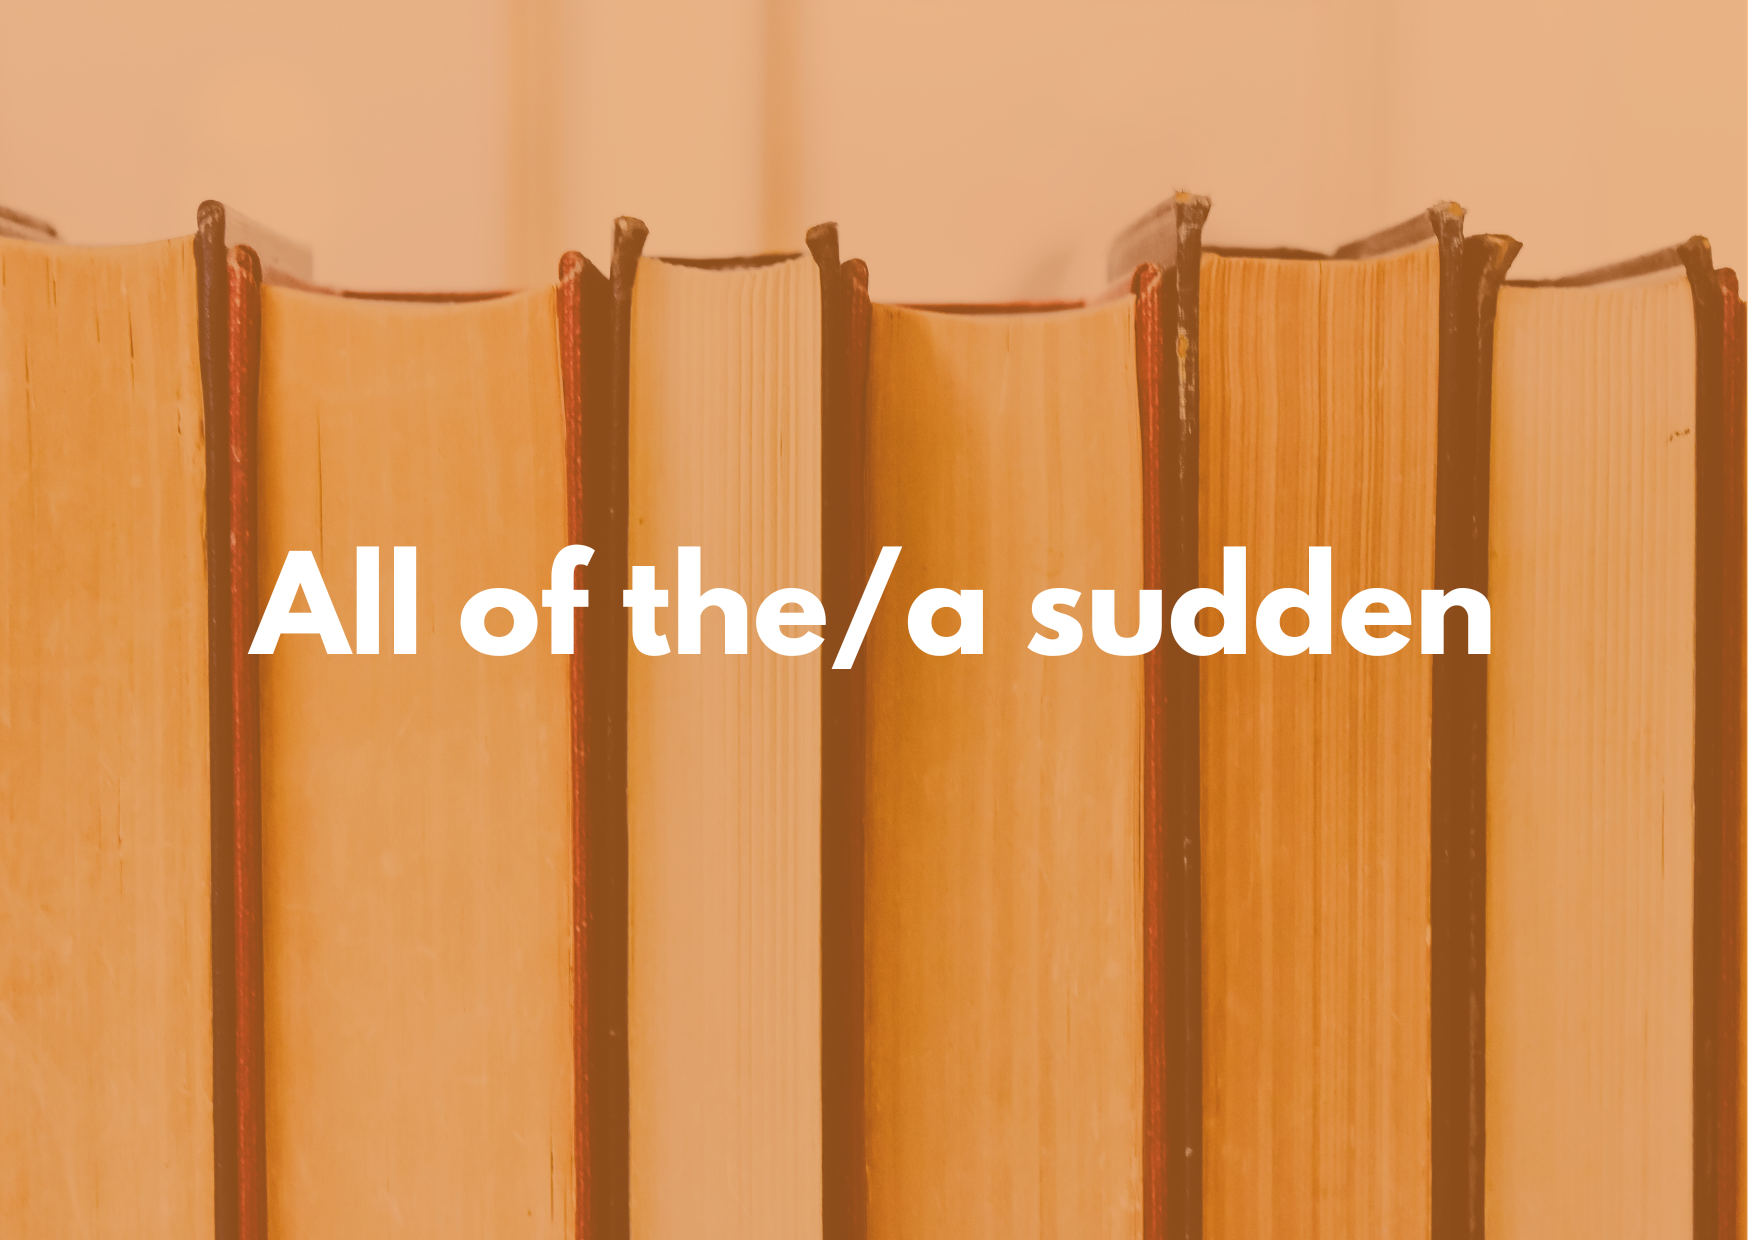 A background of books with the caption "All of the / a sudden"